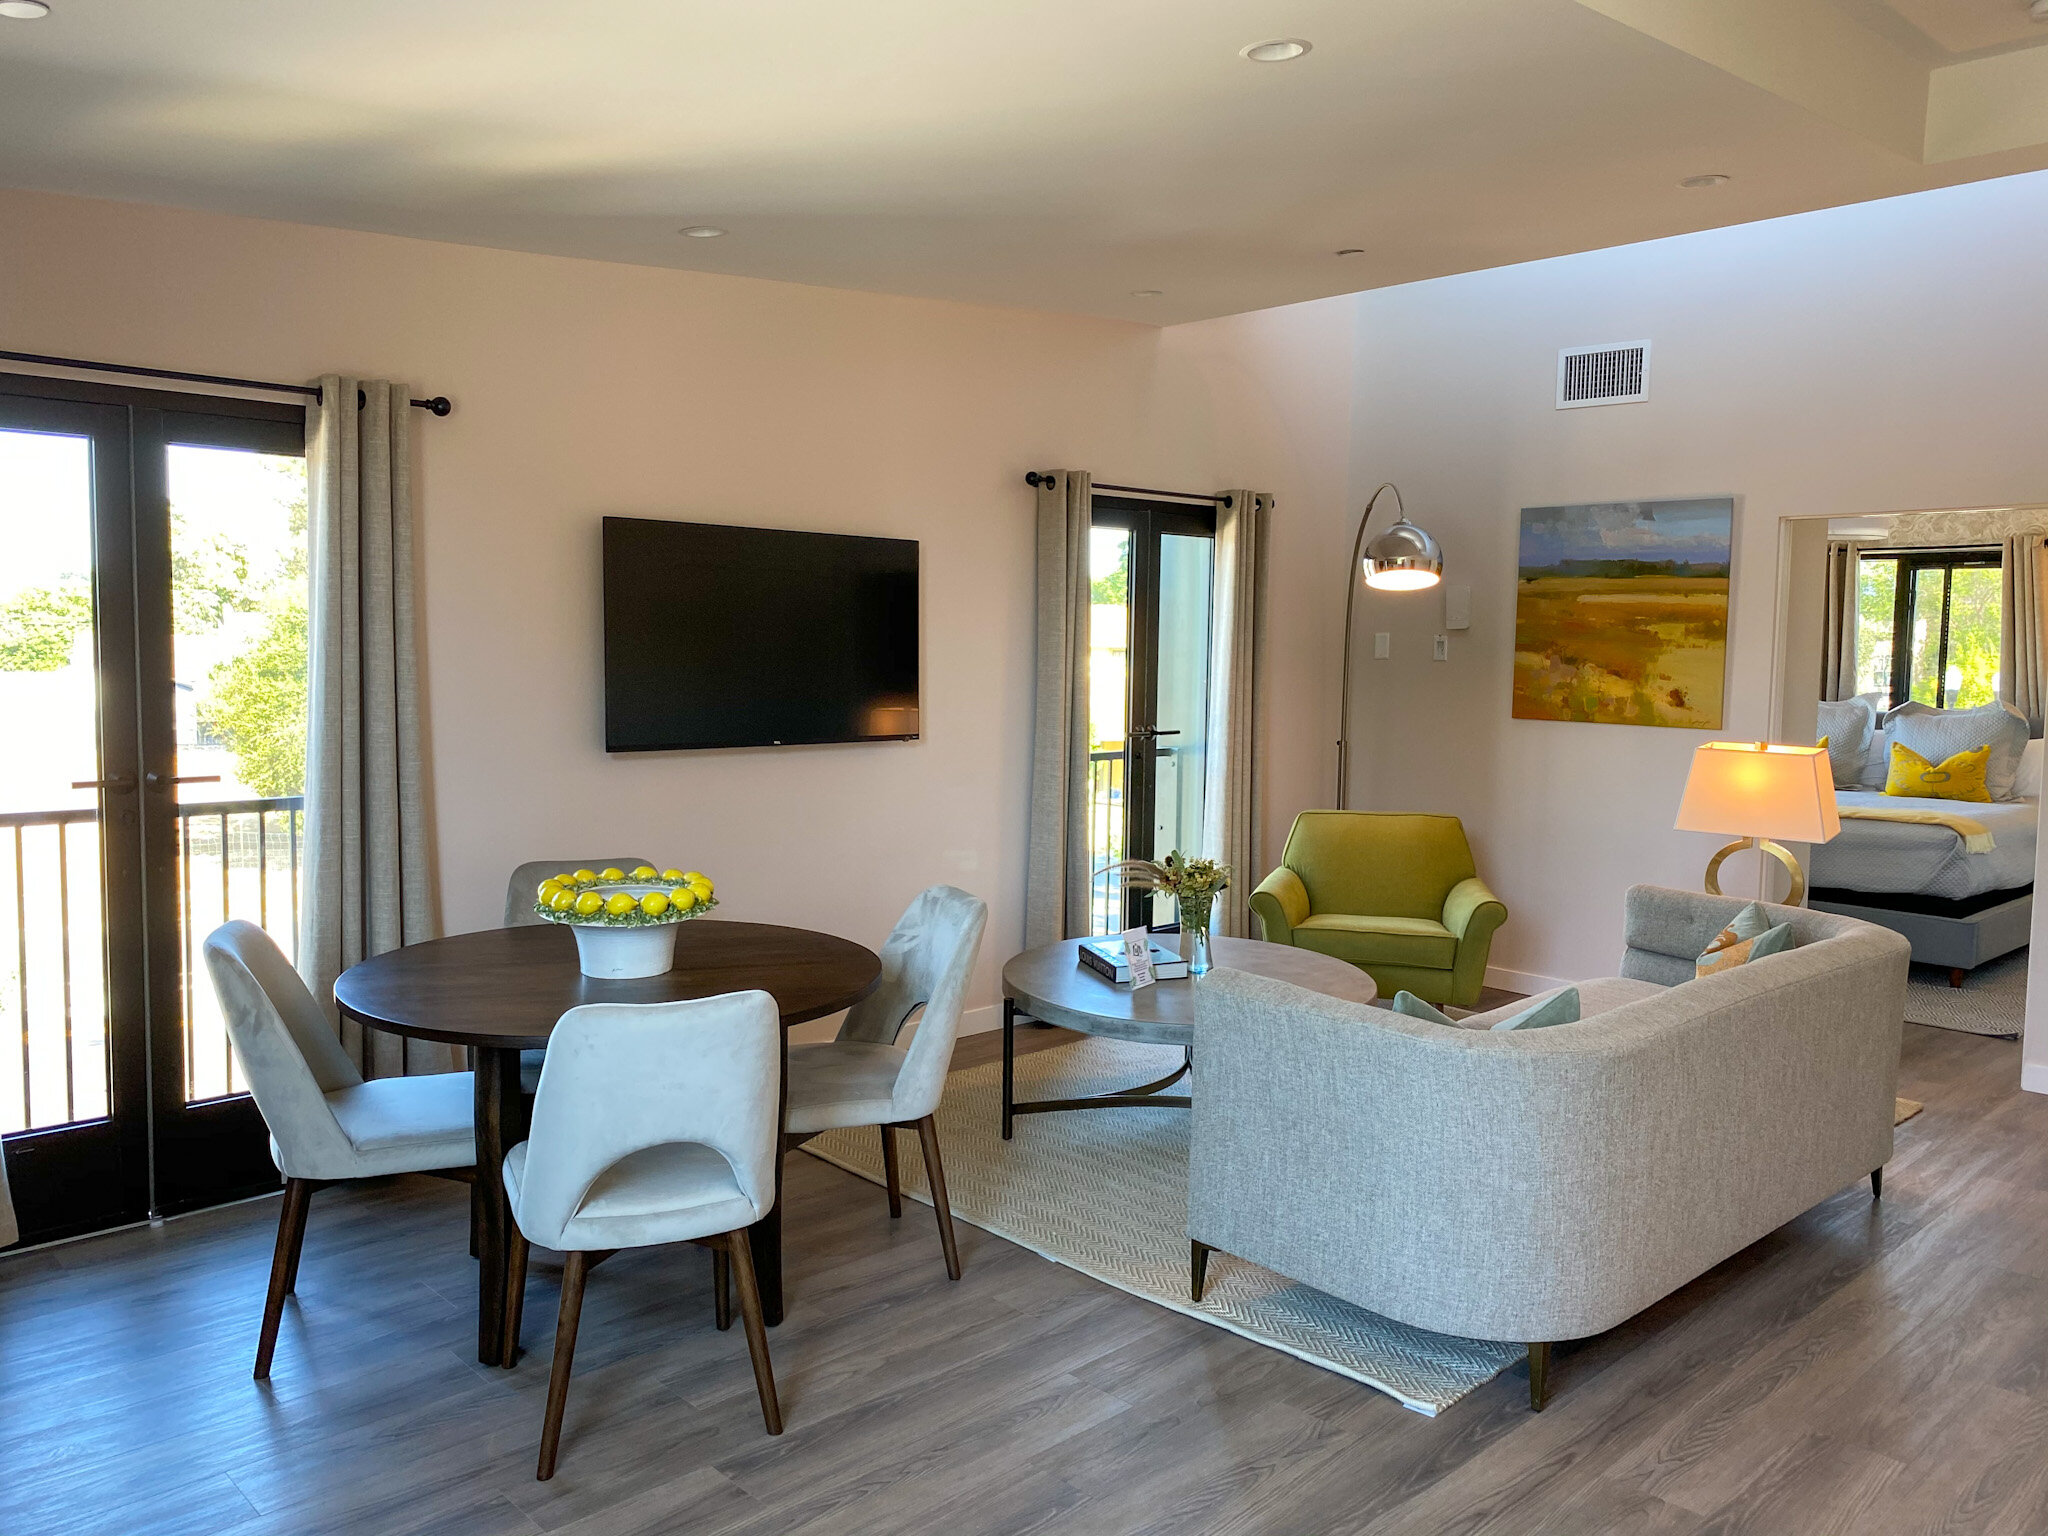 Paso Robles Hotels and Rentals - Paso Market Lofts.jpg